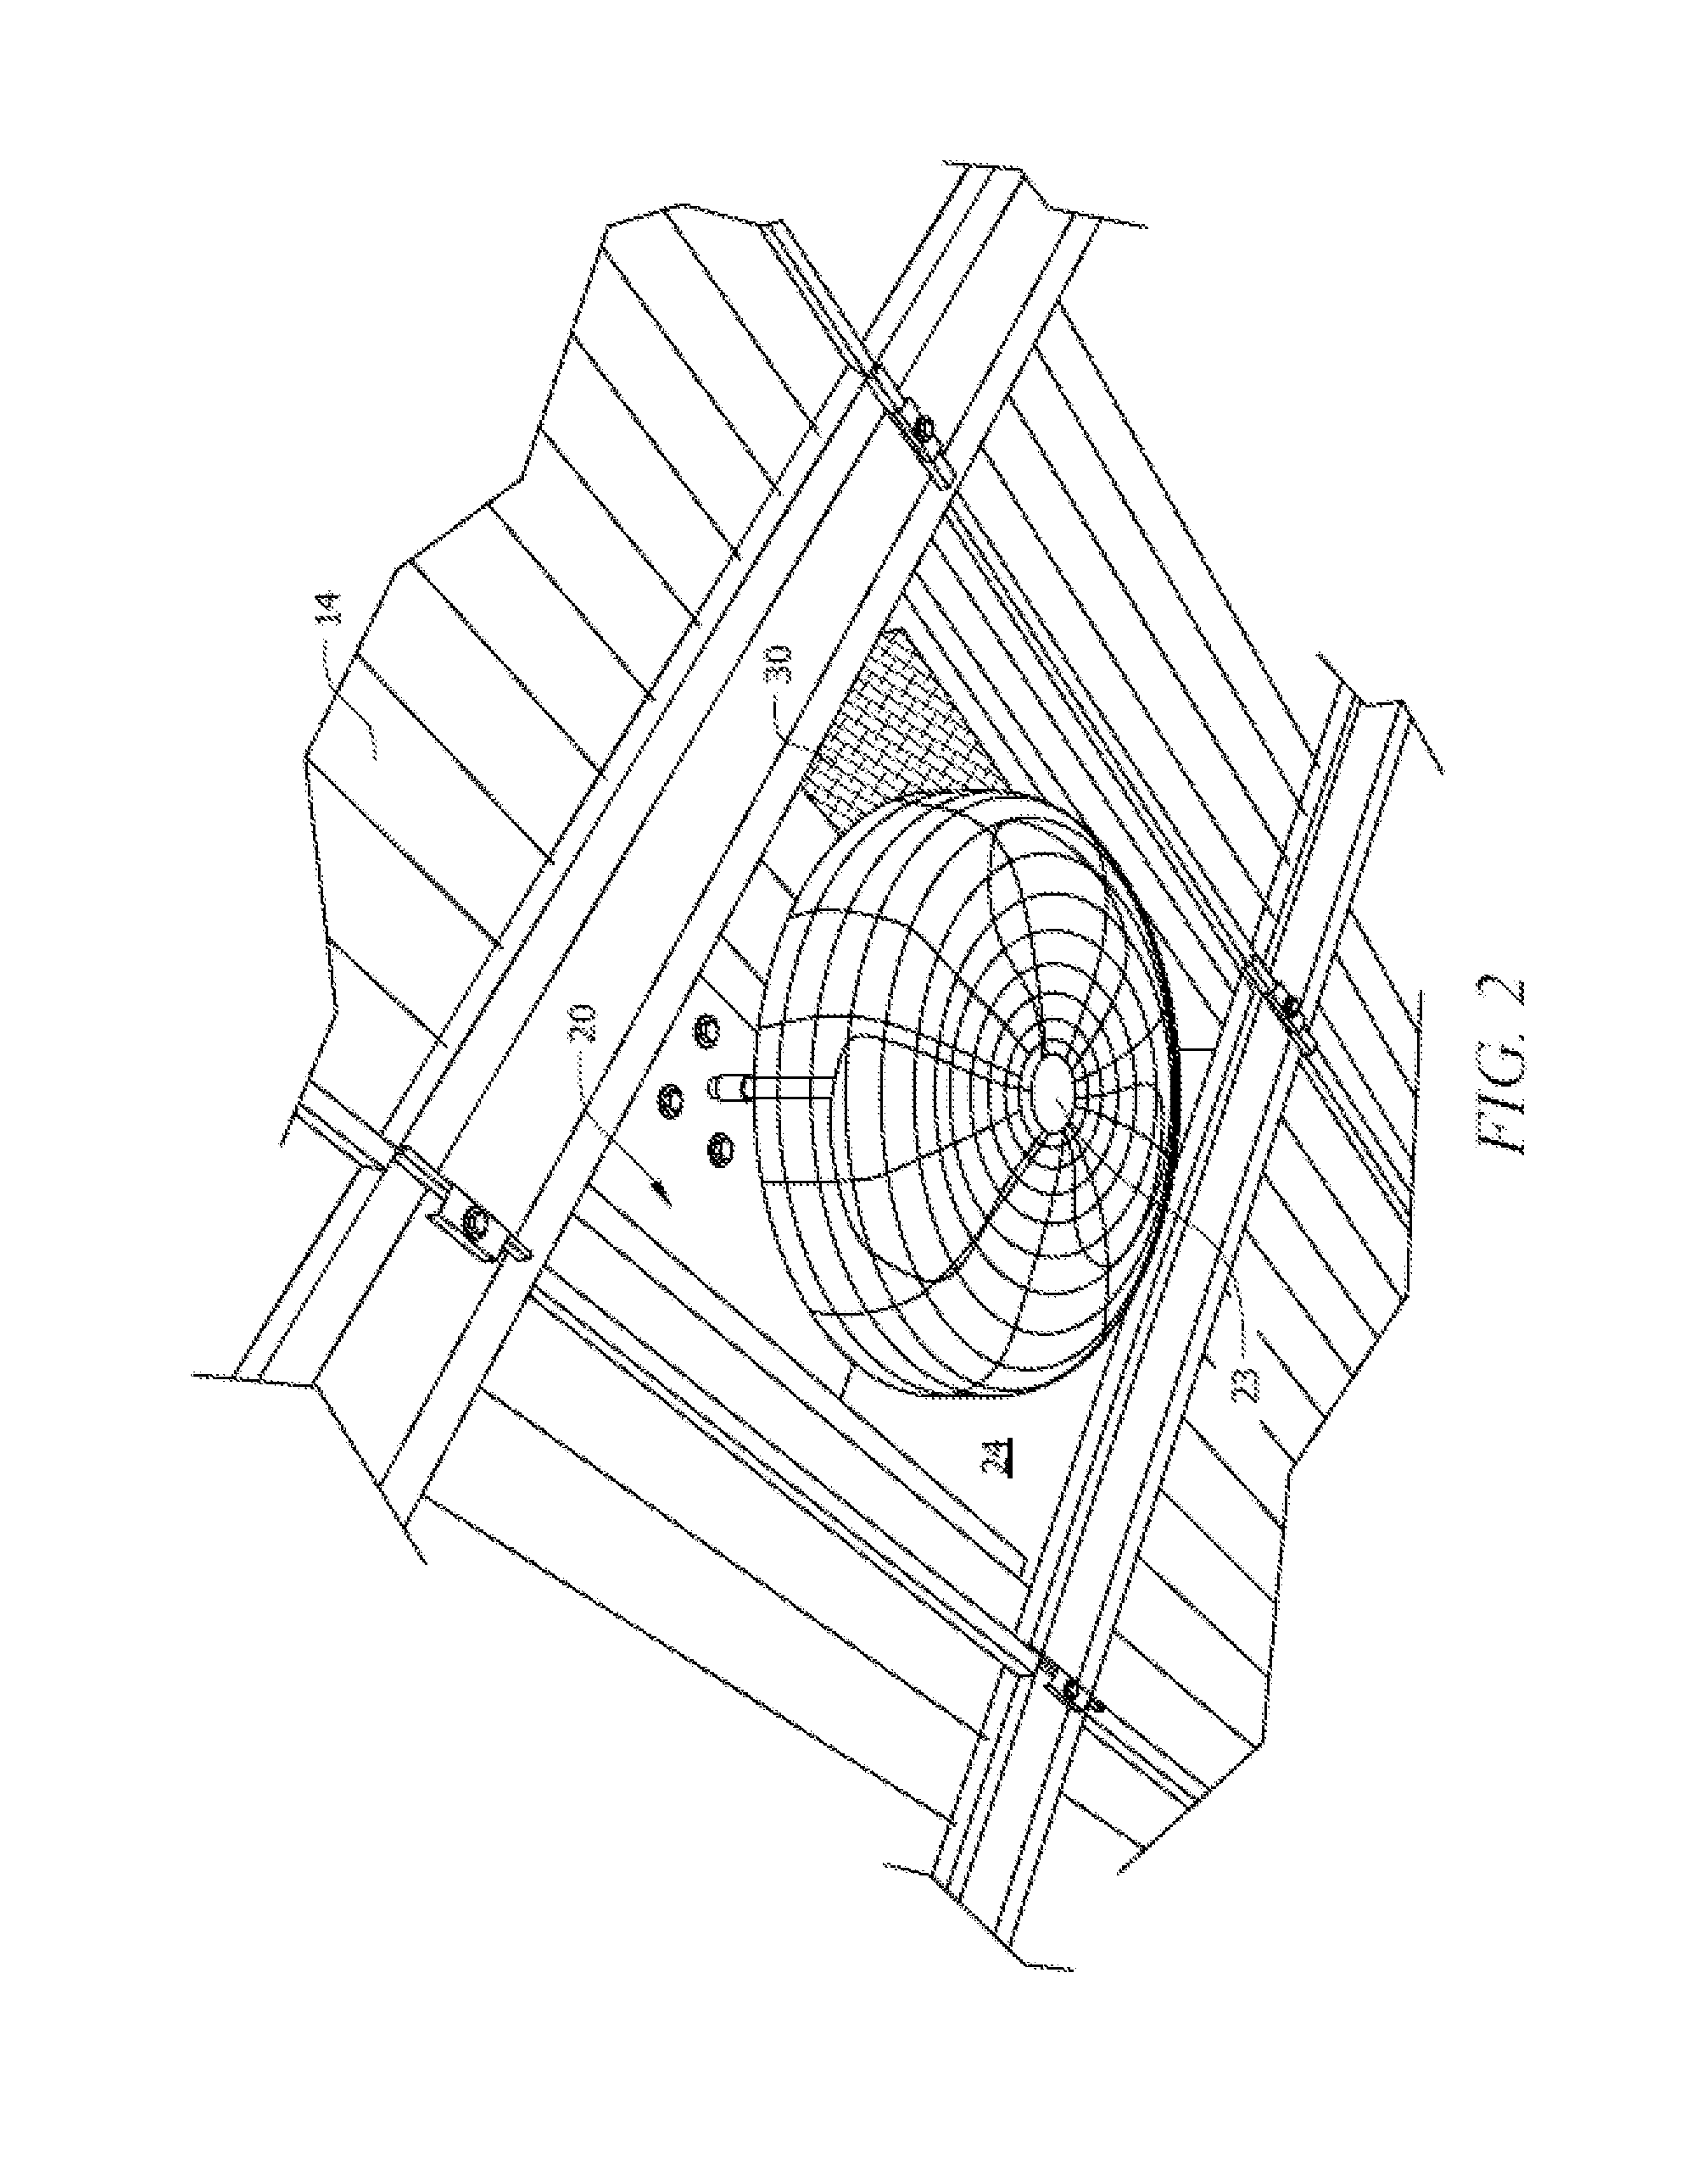 Spray booth system and methods